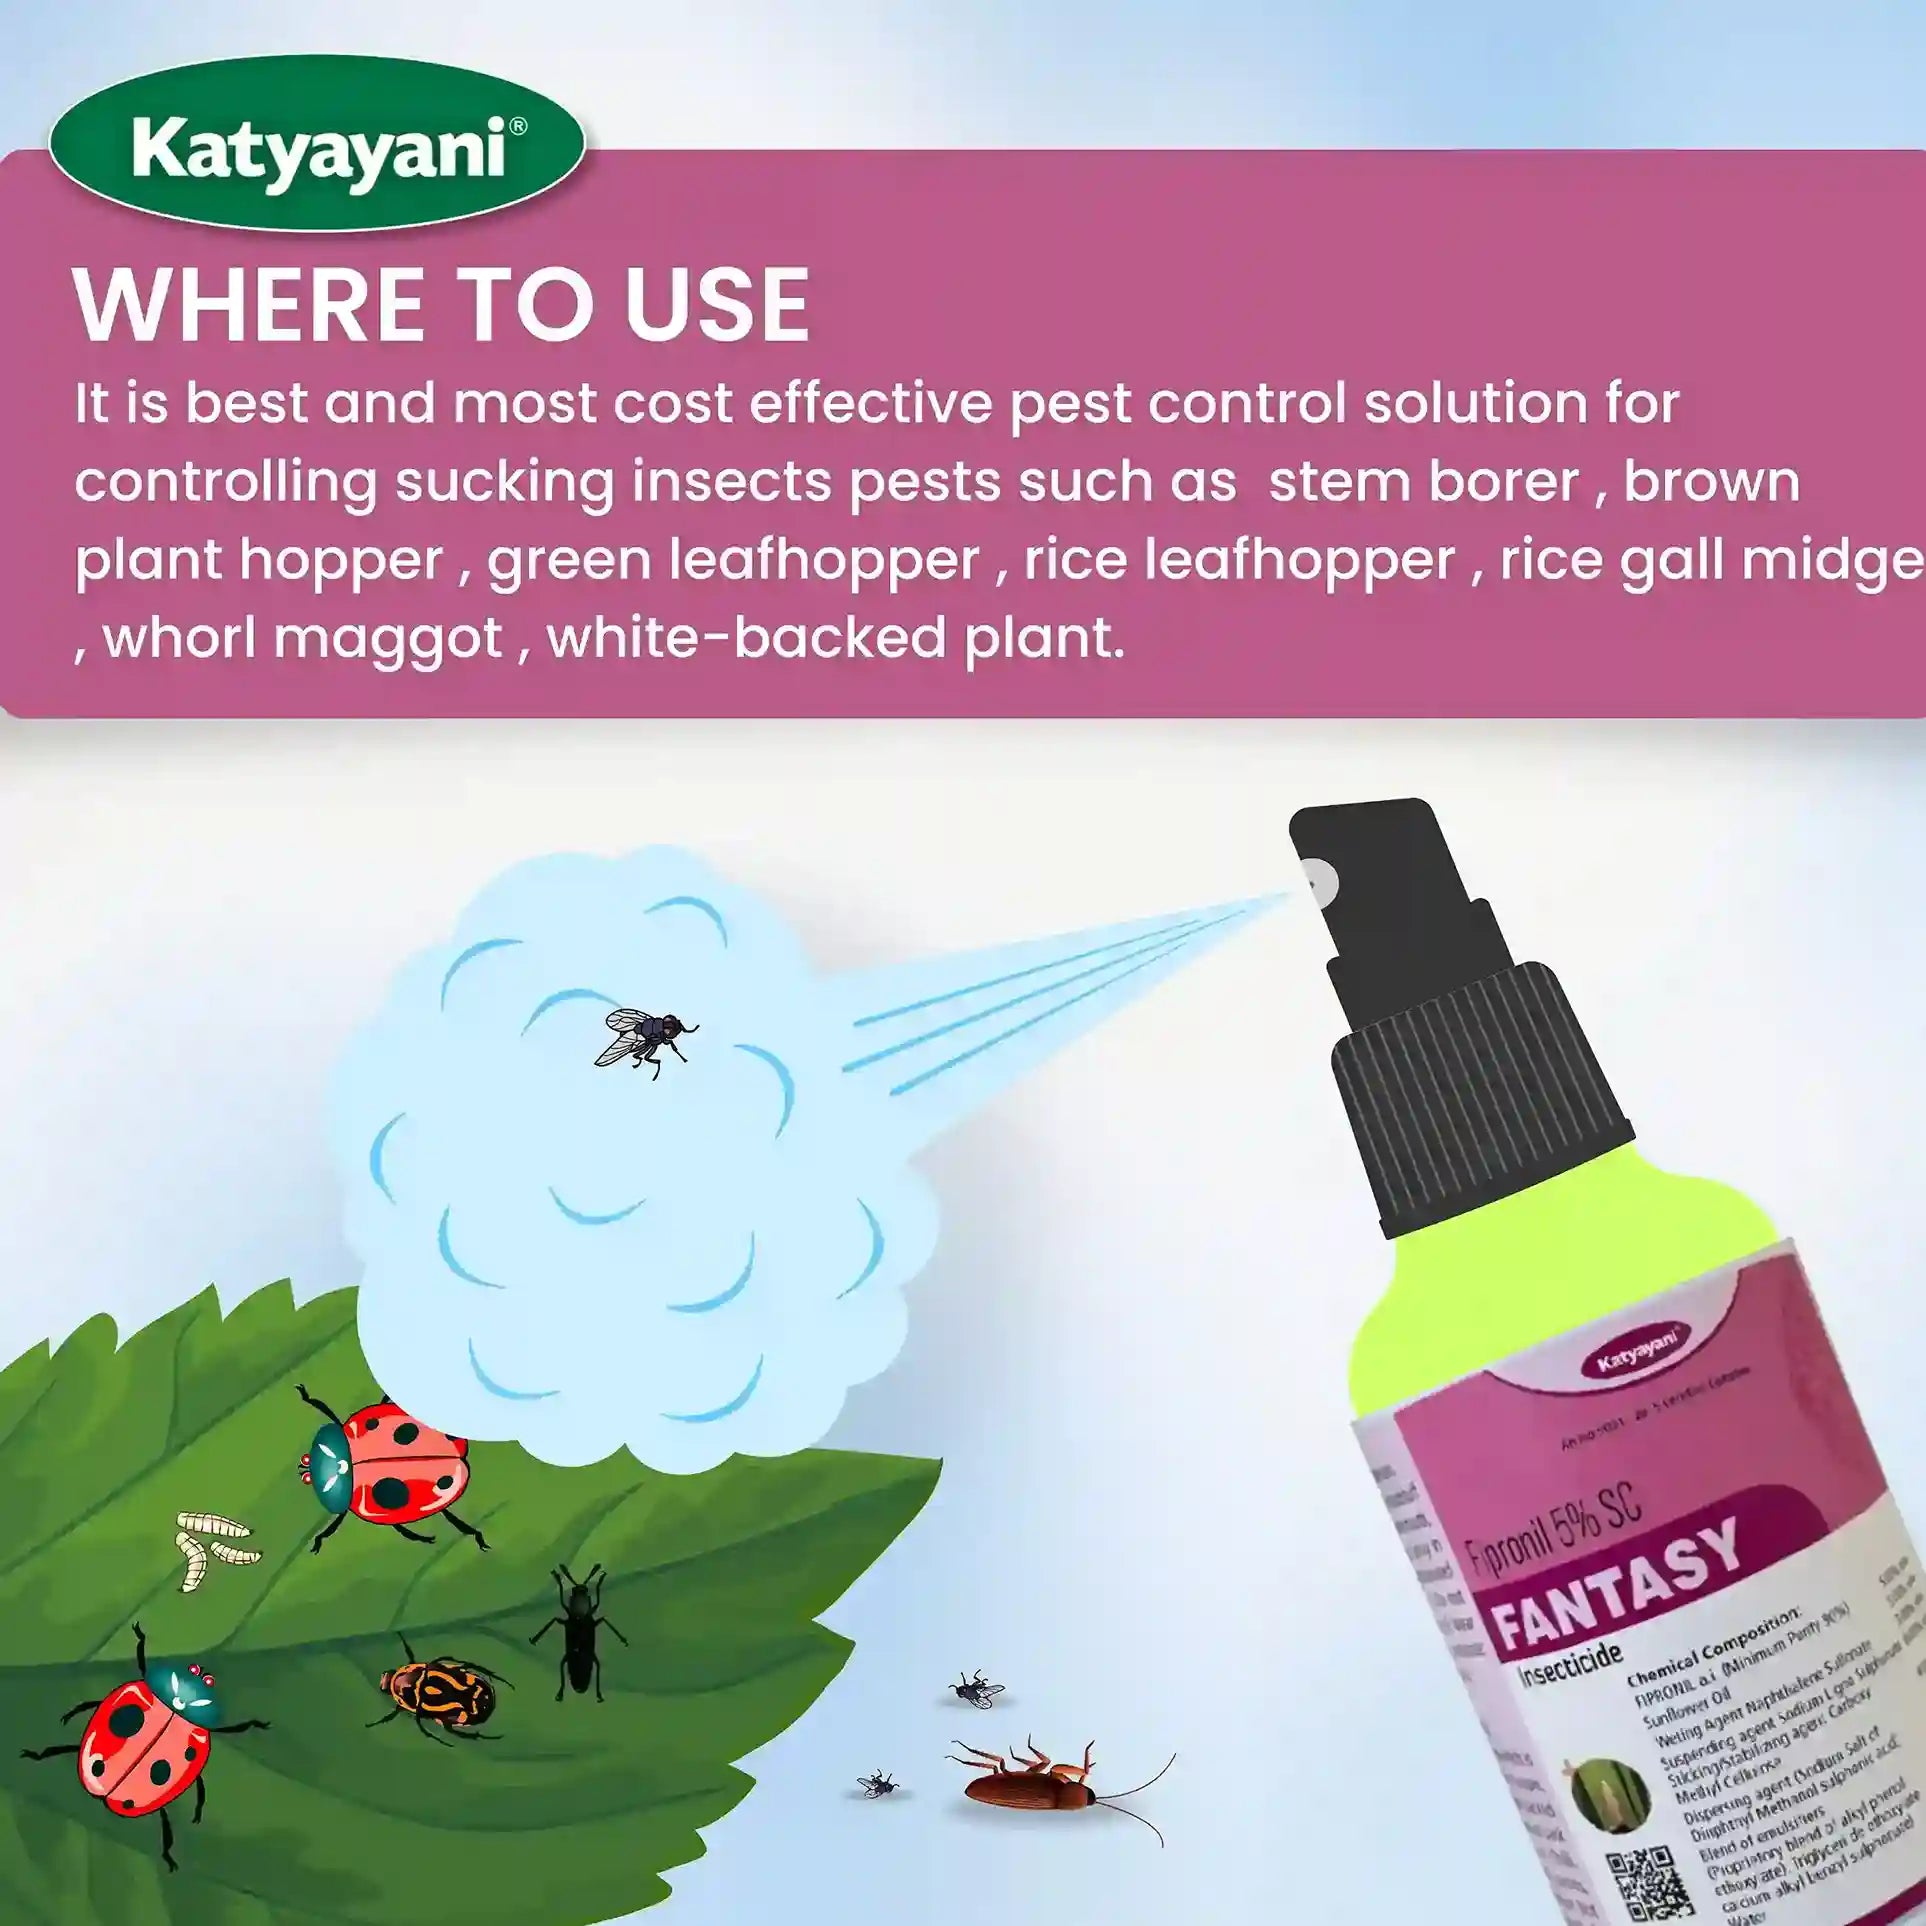 Katyayani Fantasy | Fipronil 5% SC | Chemical insecticide USES